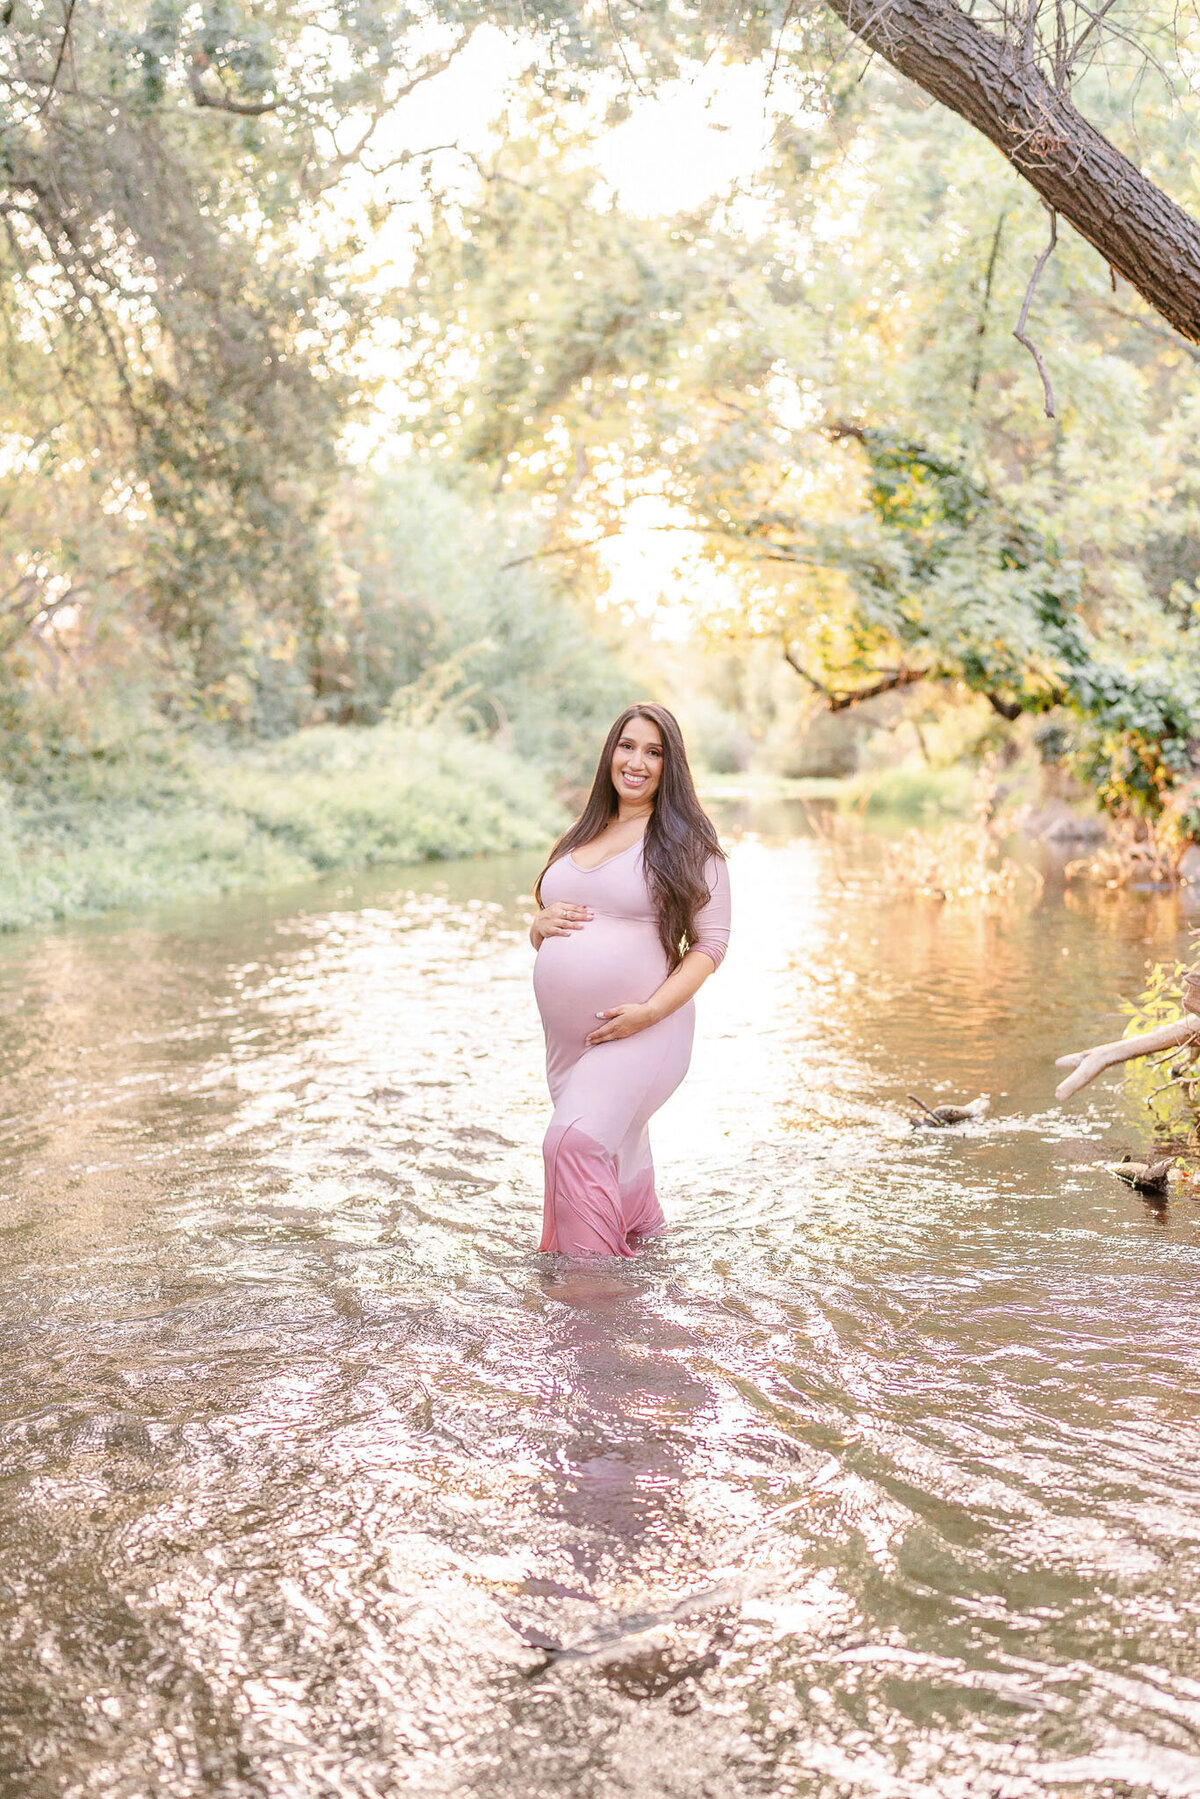 Why You Should Take Your Maternity Photos in San Francisco